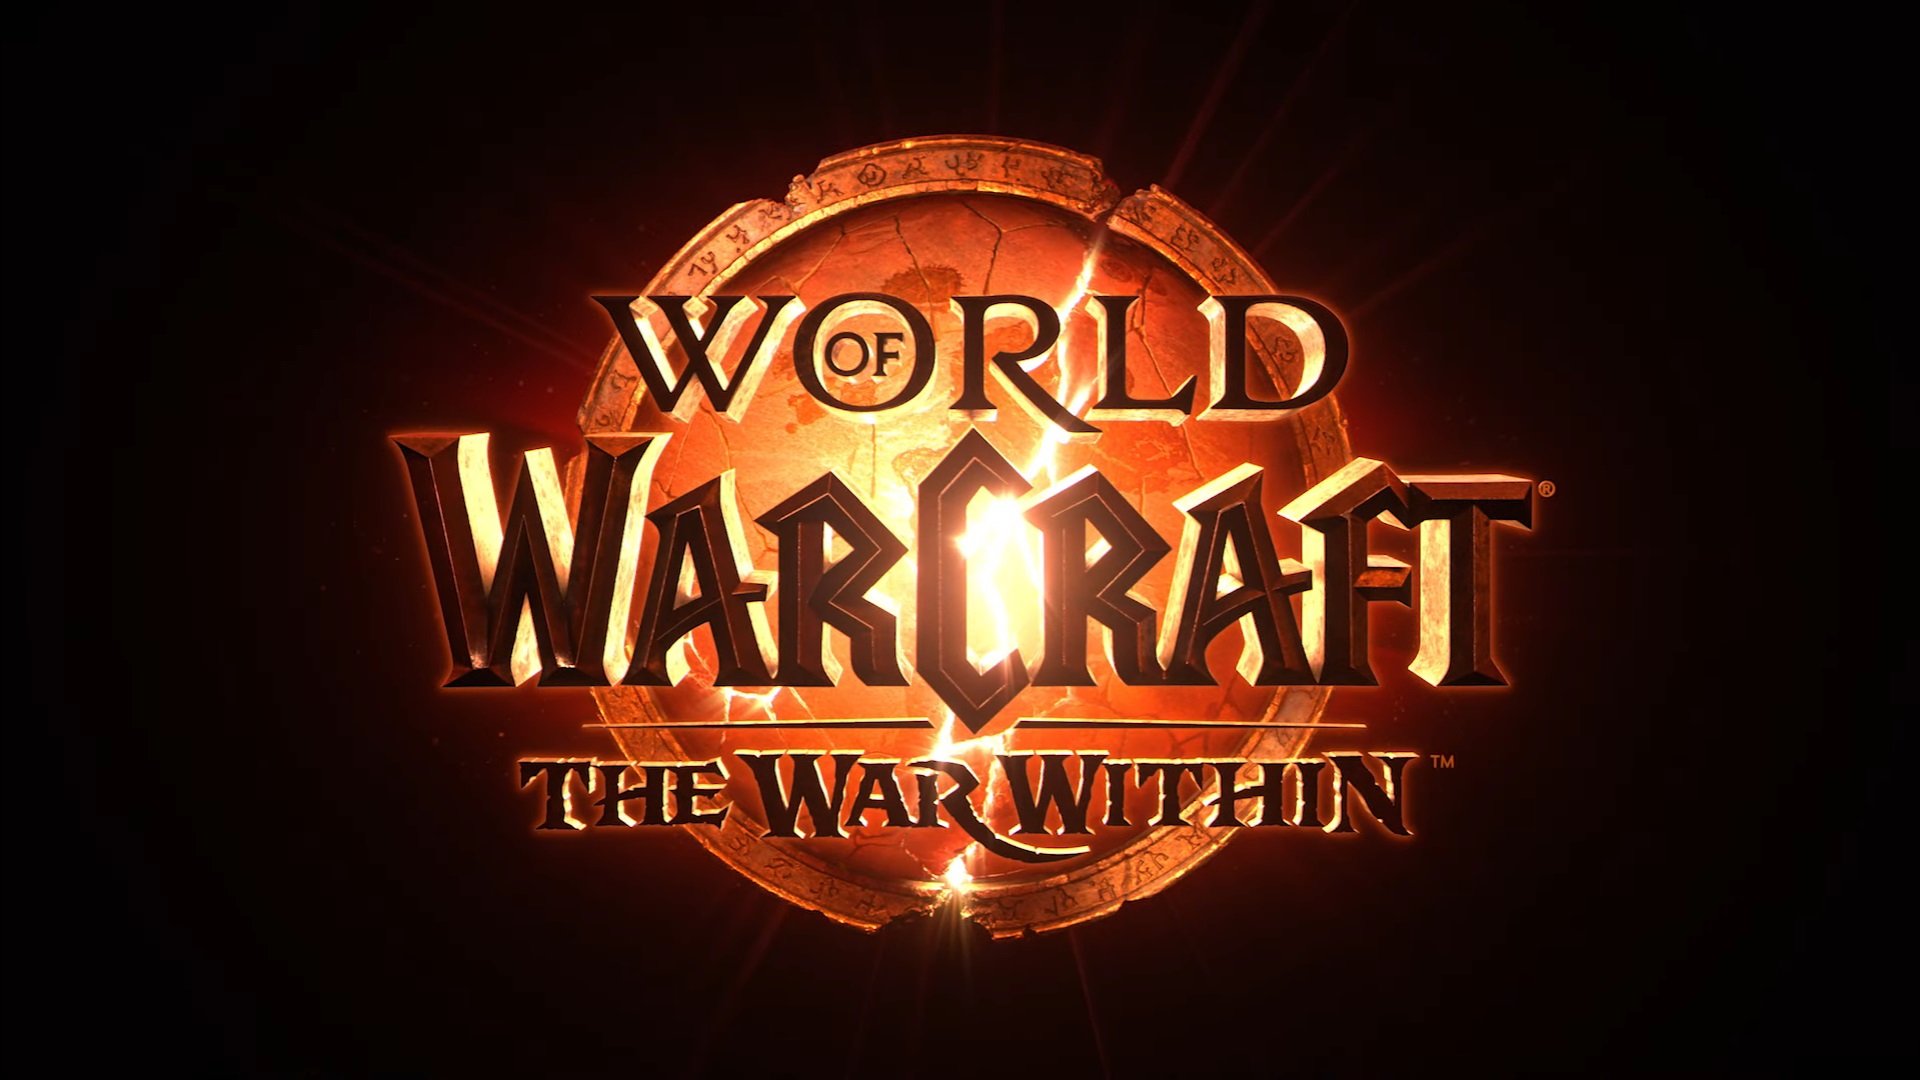 Against the Storm feels like WarCraft without the war, and it's